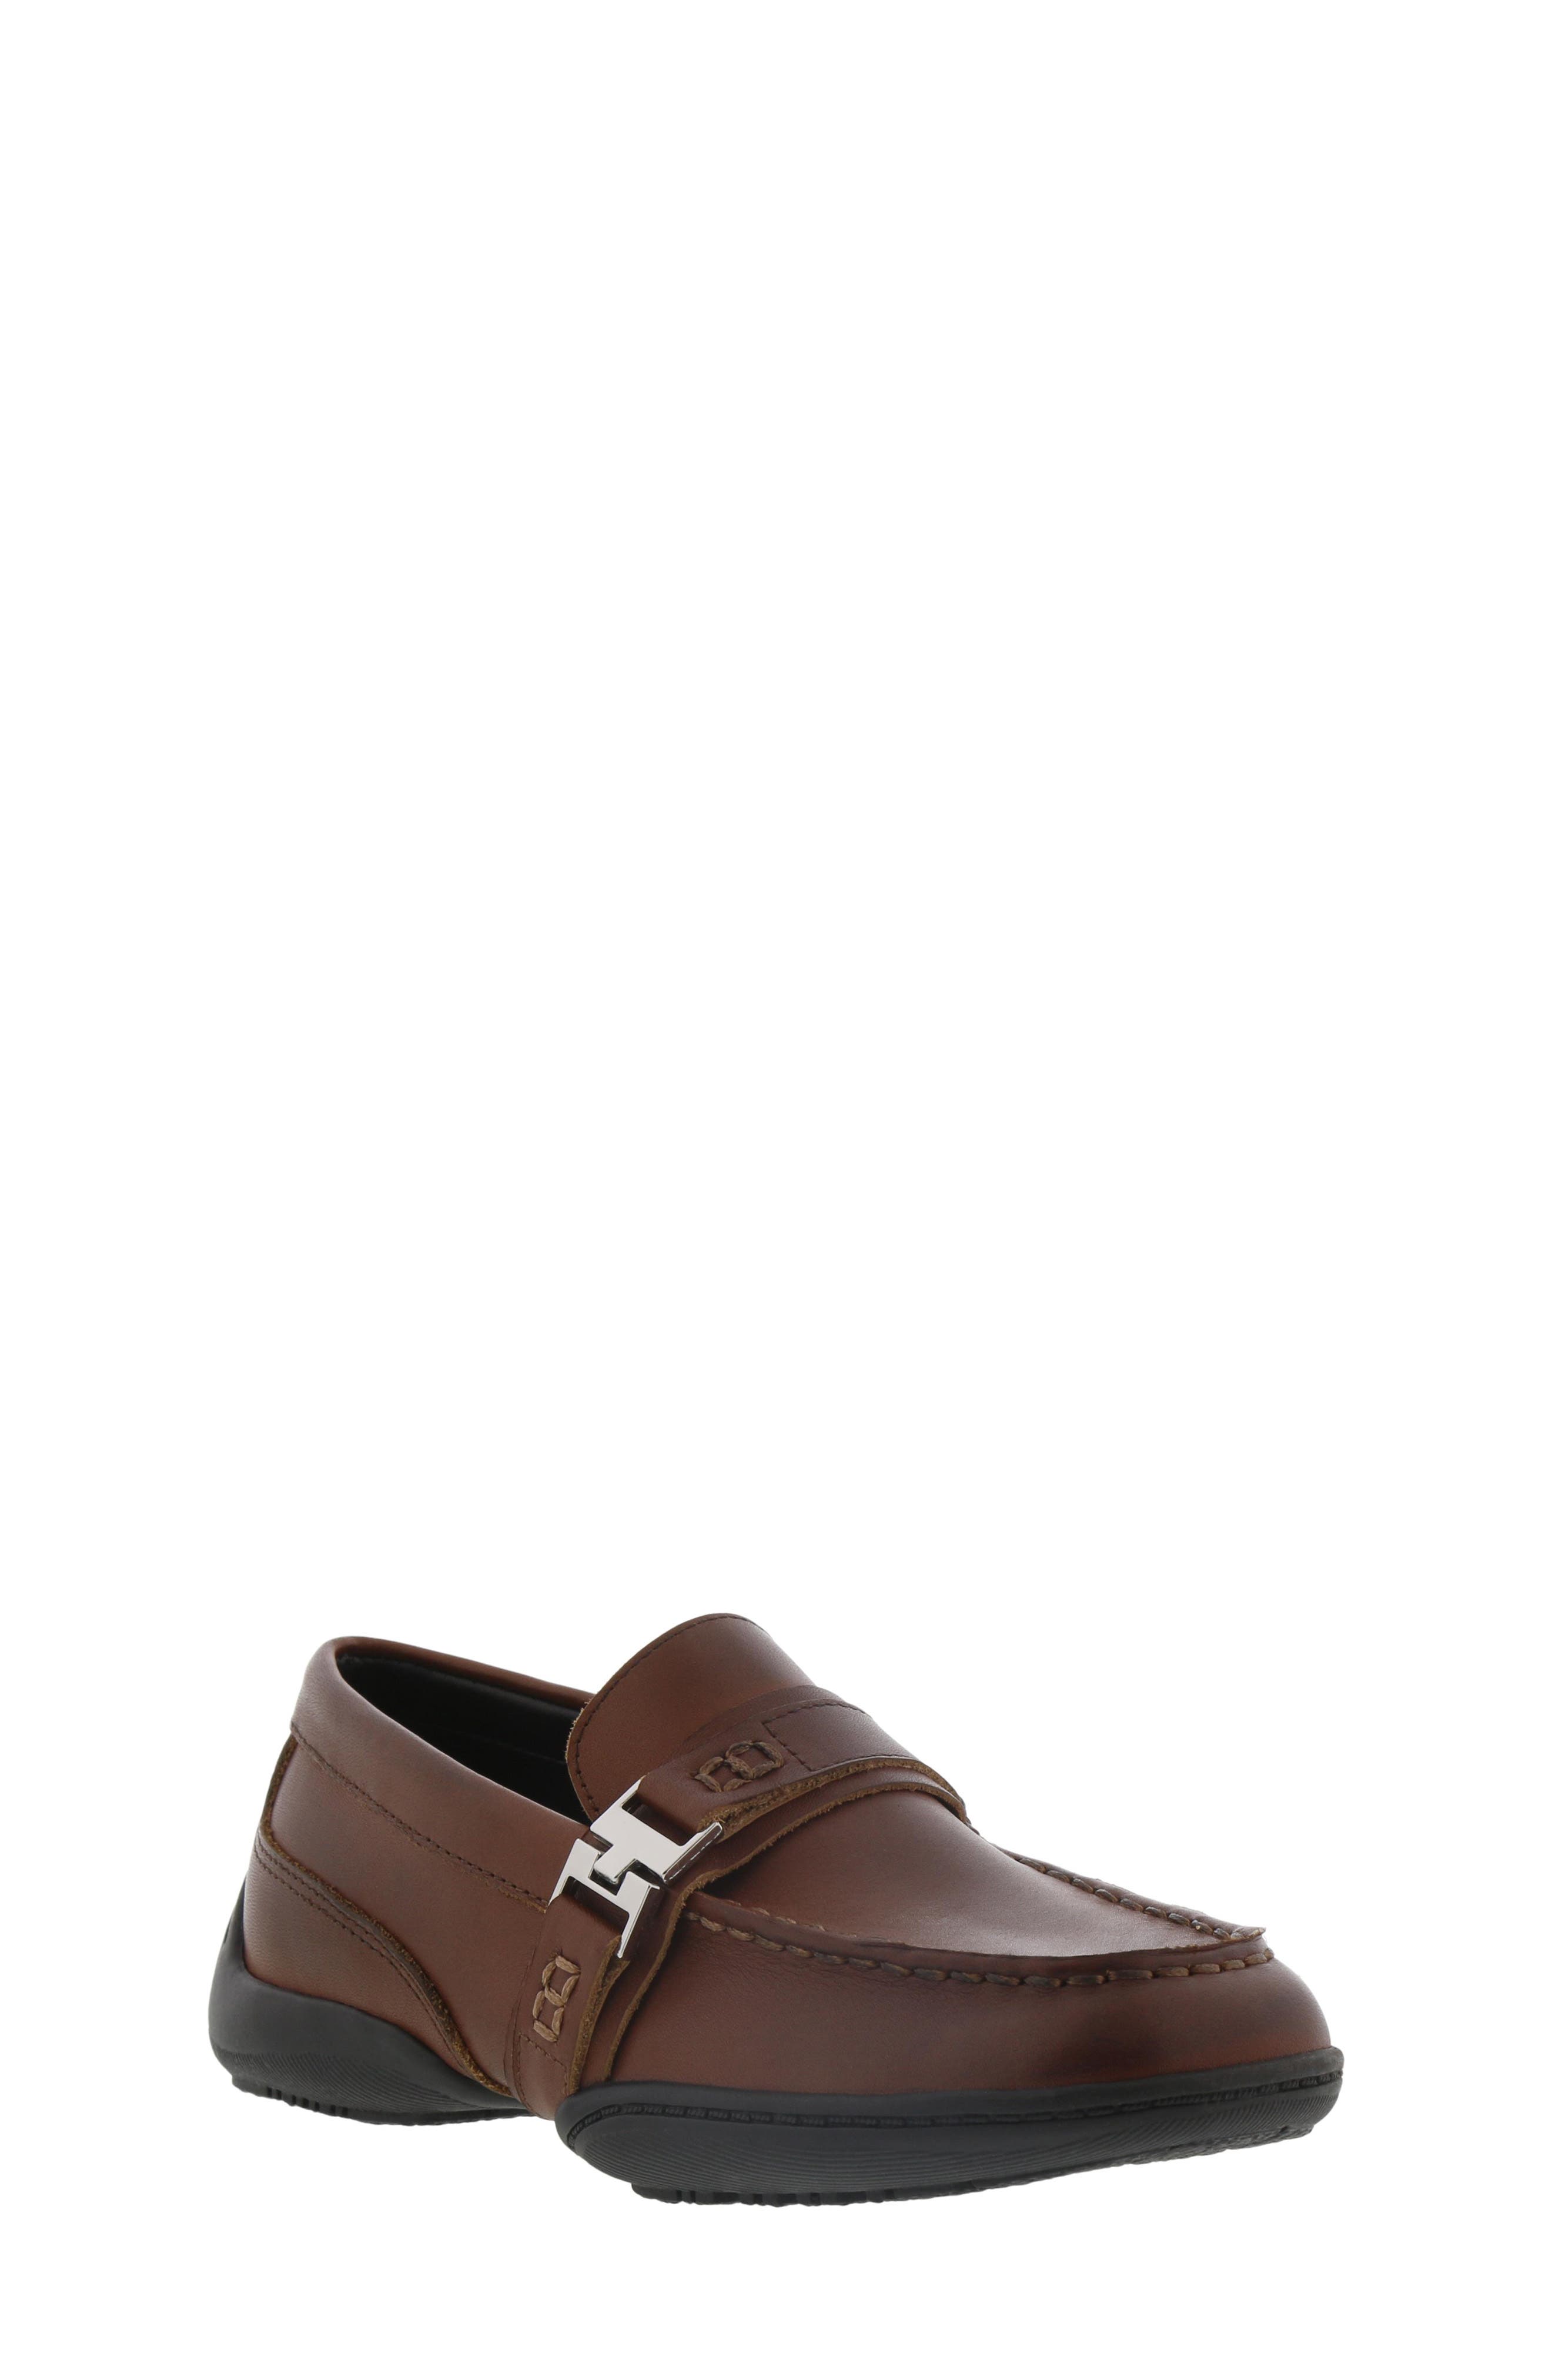 kenneth cole mens shoes clearance